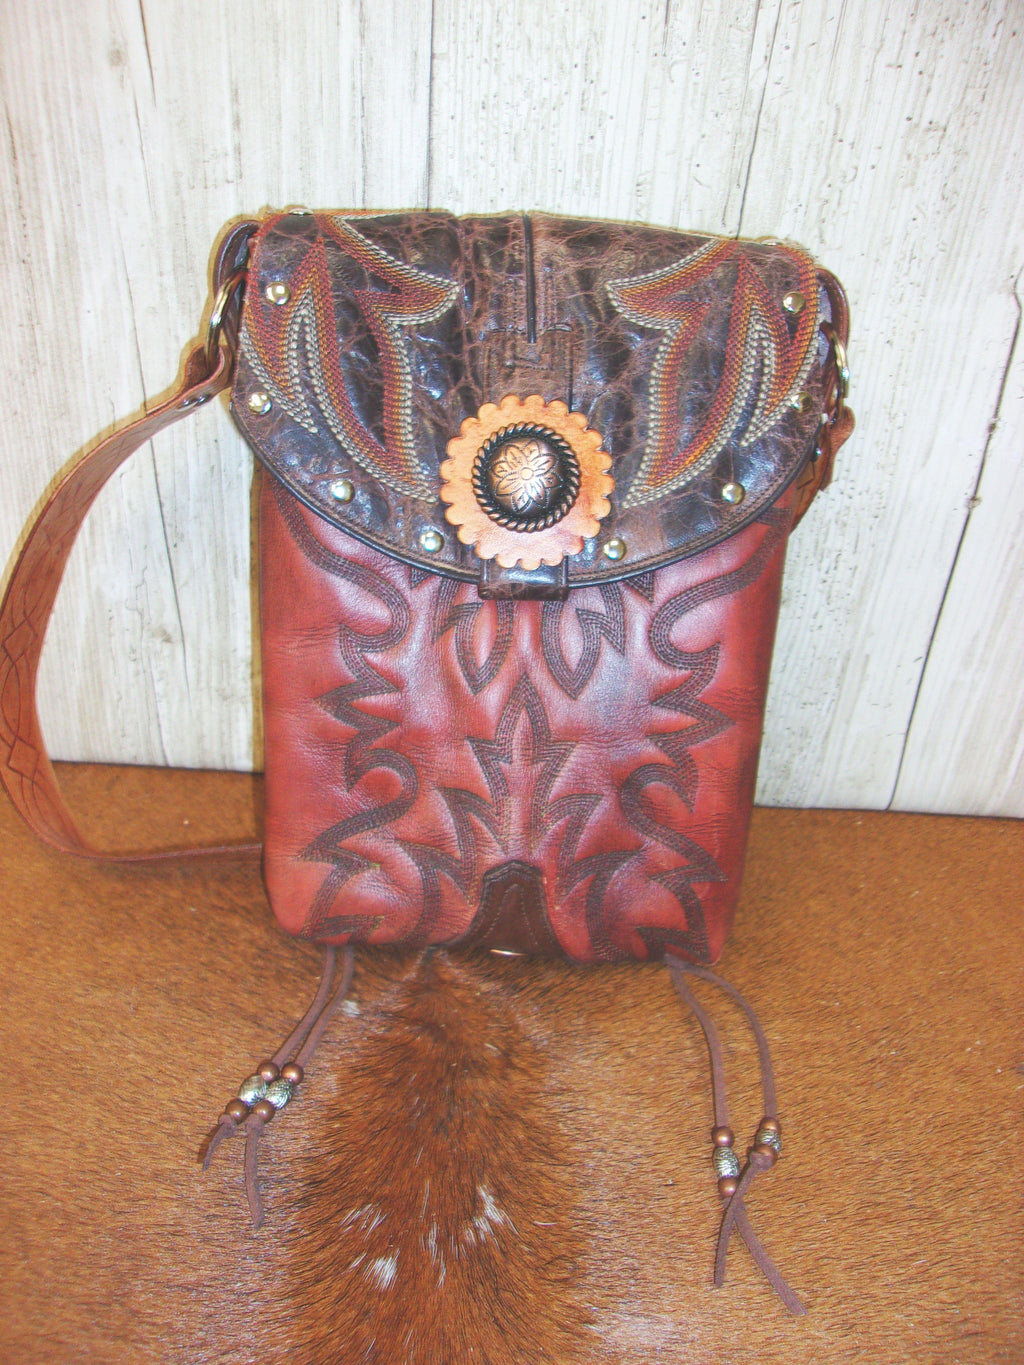 Cowboy Boot Concealed Carry Purse - Crossbody Conceal Carry Purse CB160 cowboy boot purses, western fringe purse, handmade leather purses, boot purse, handmade western purse, custom leather handbags Chris Thompson Bags